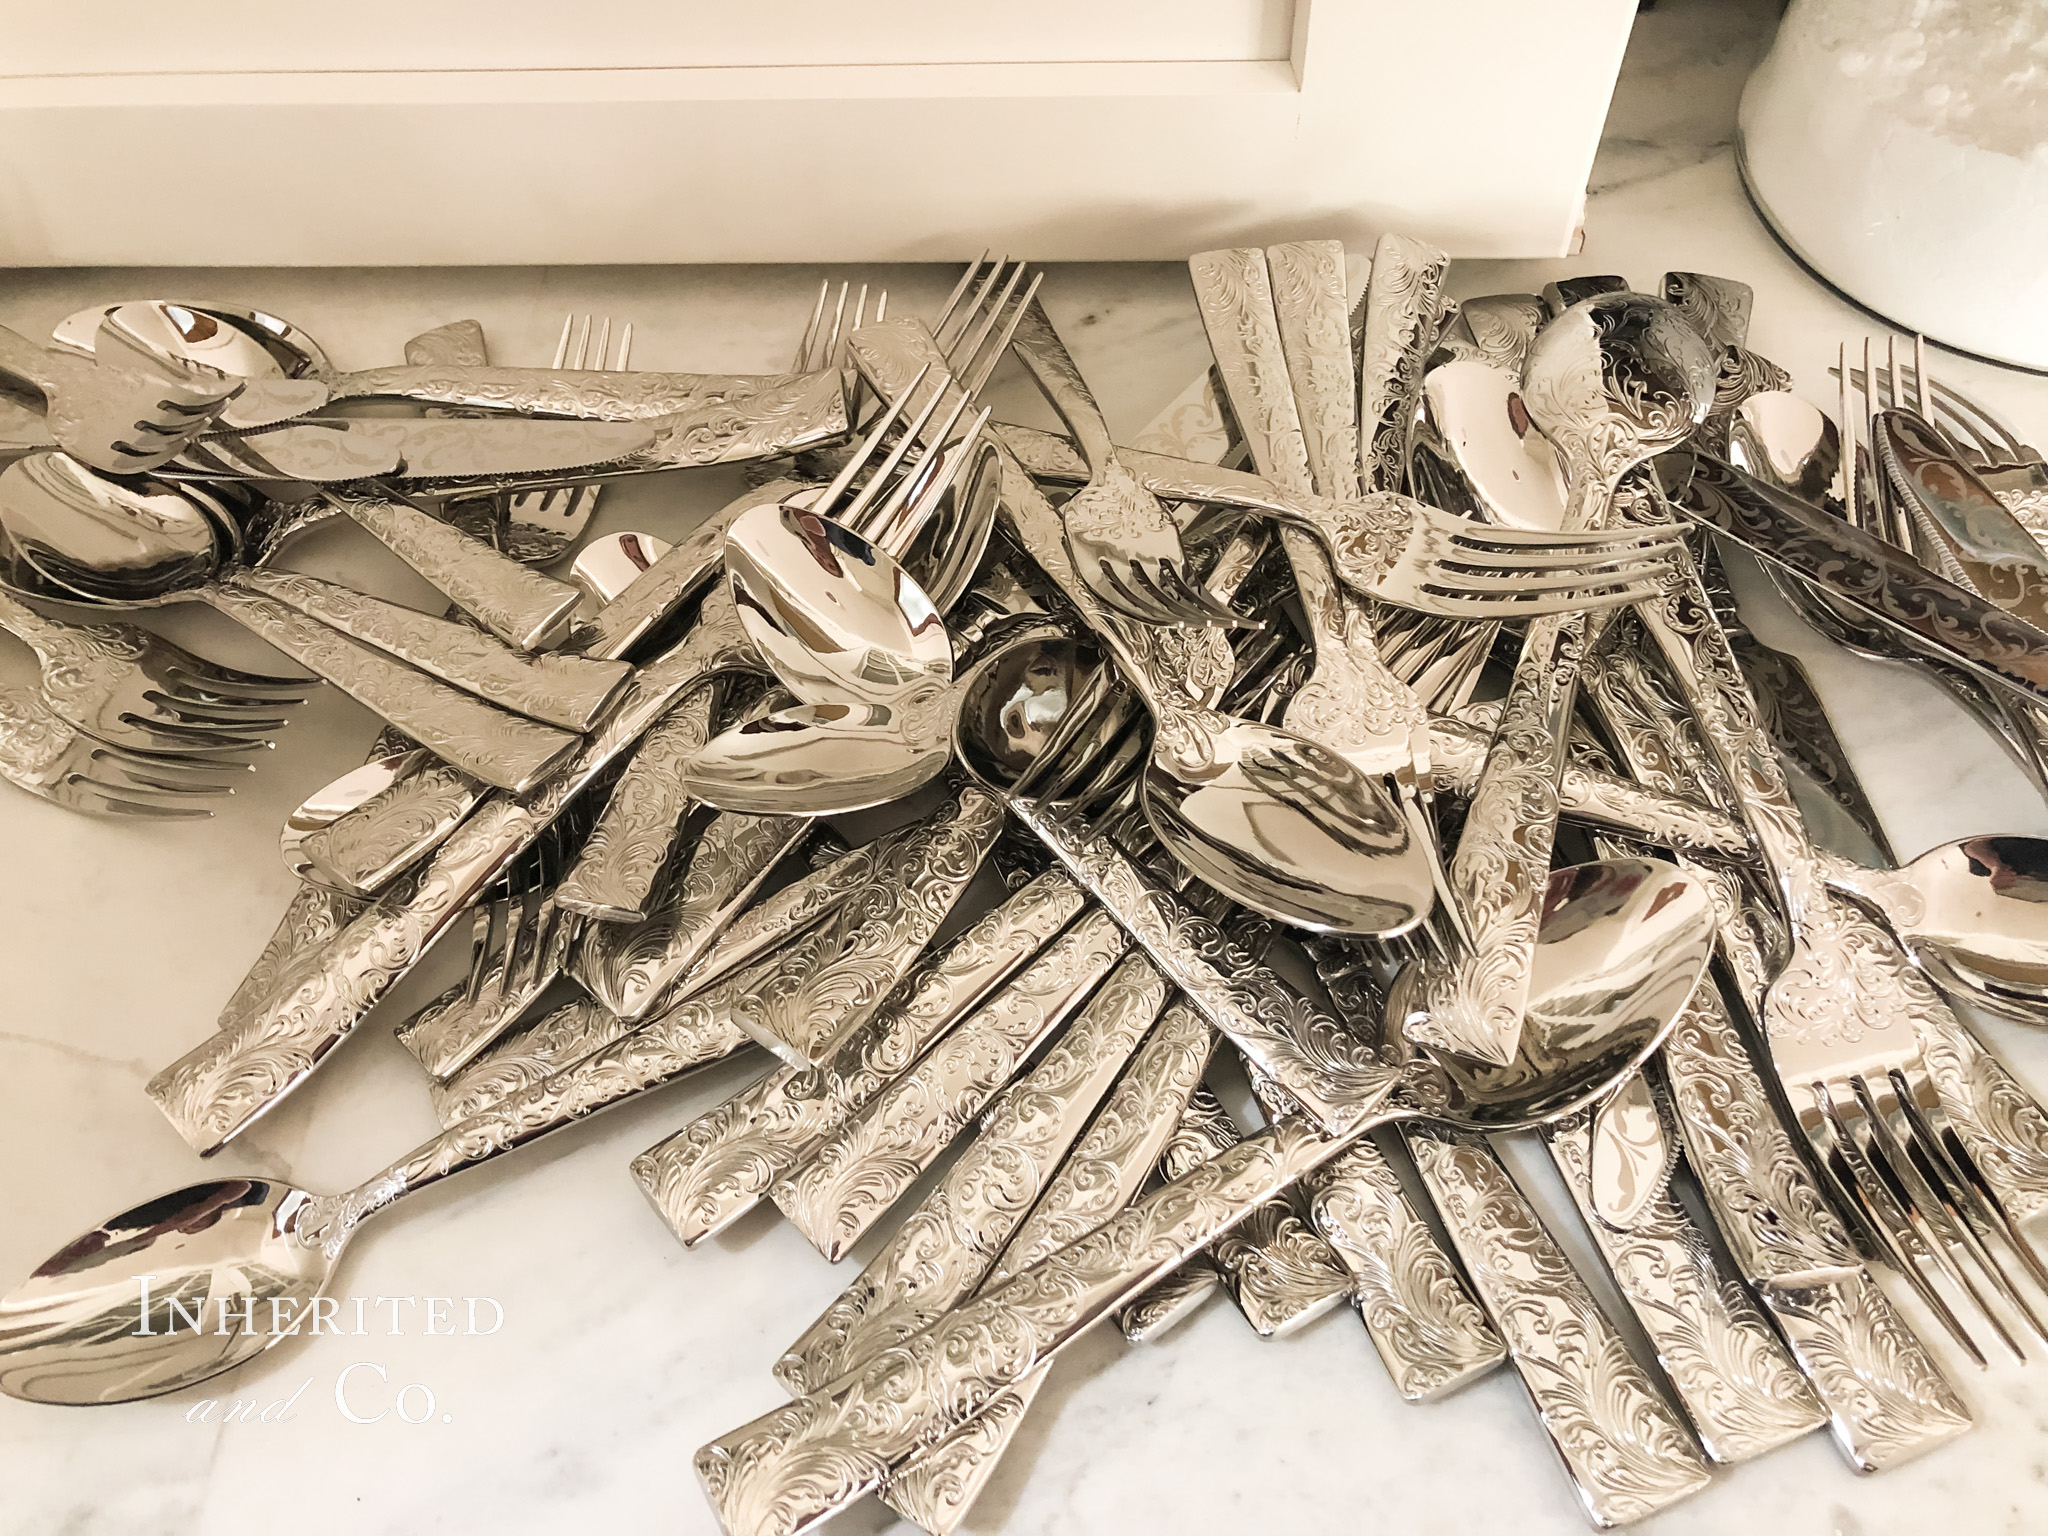 etched silverware in a pile